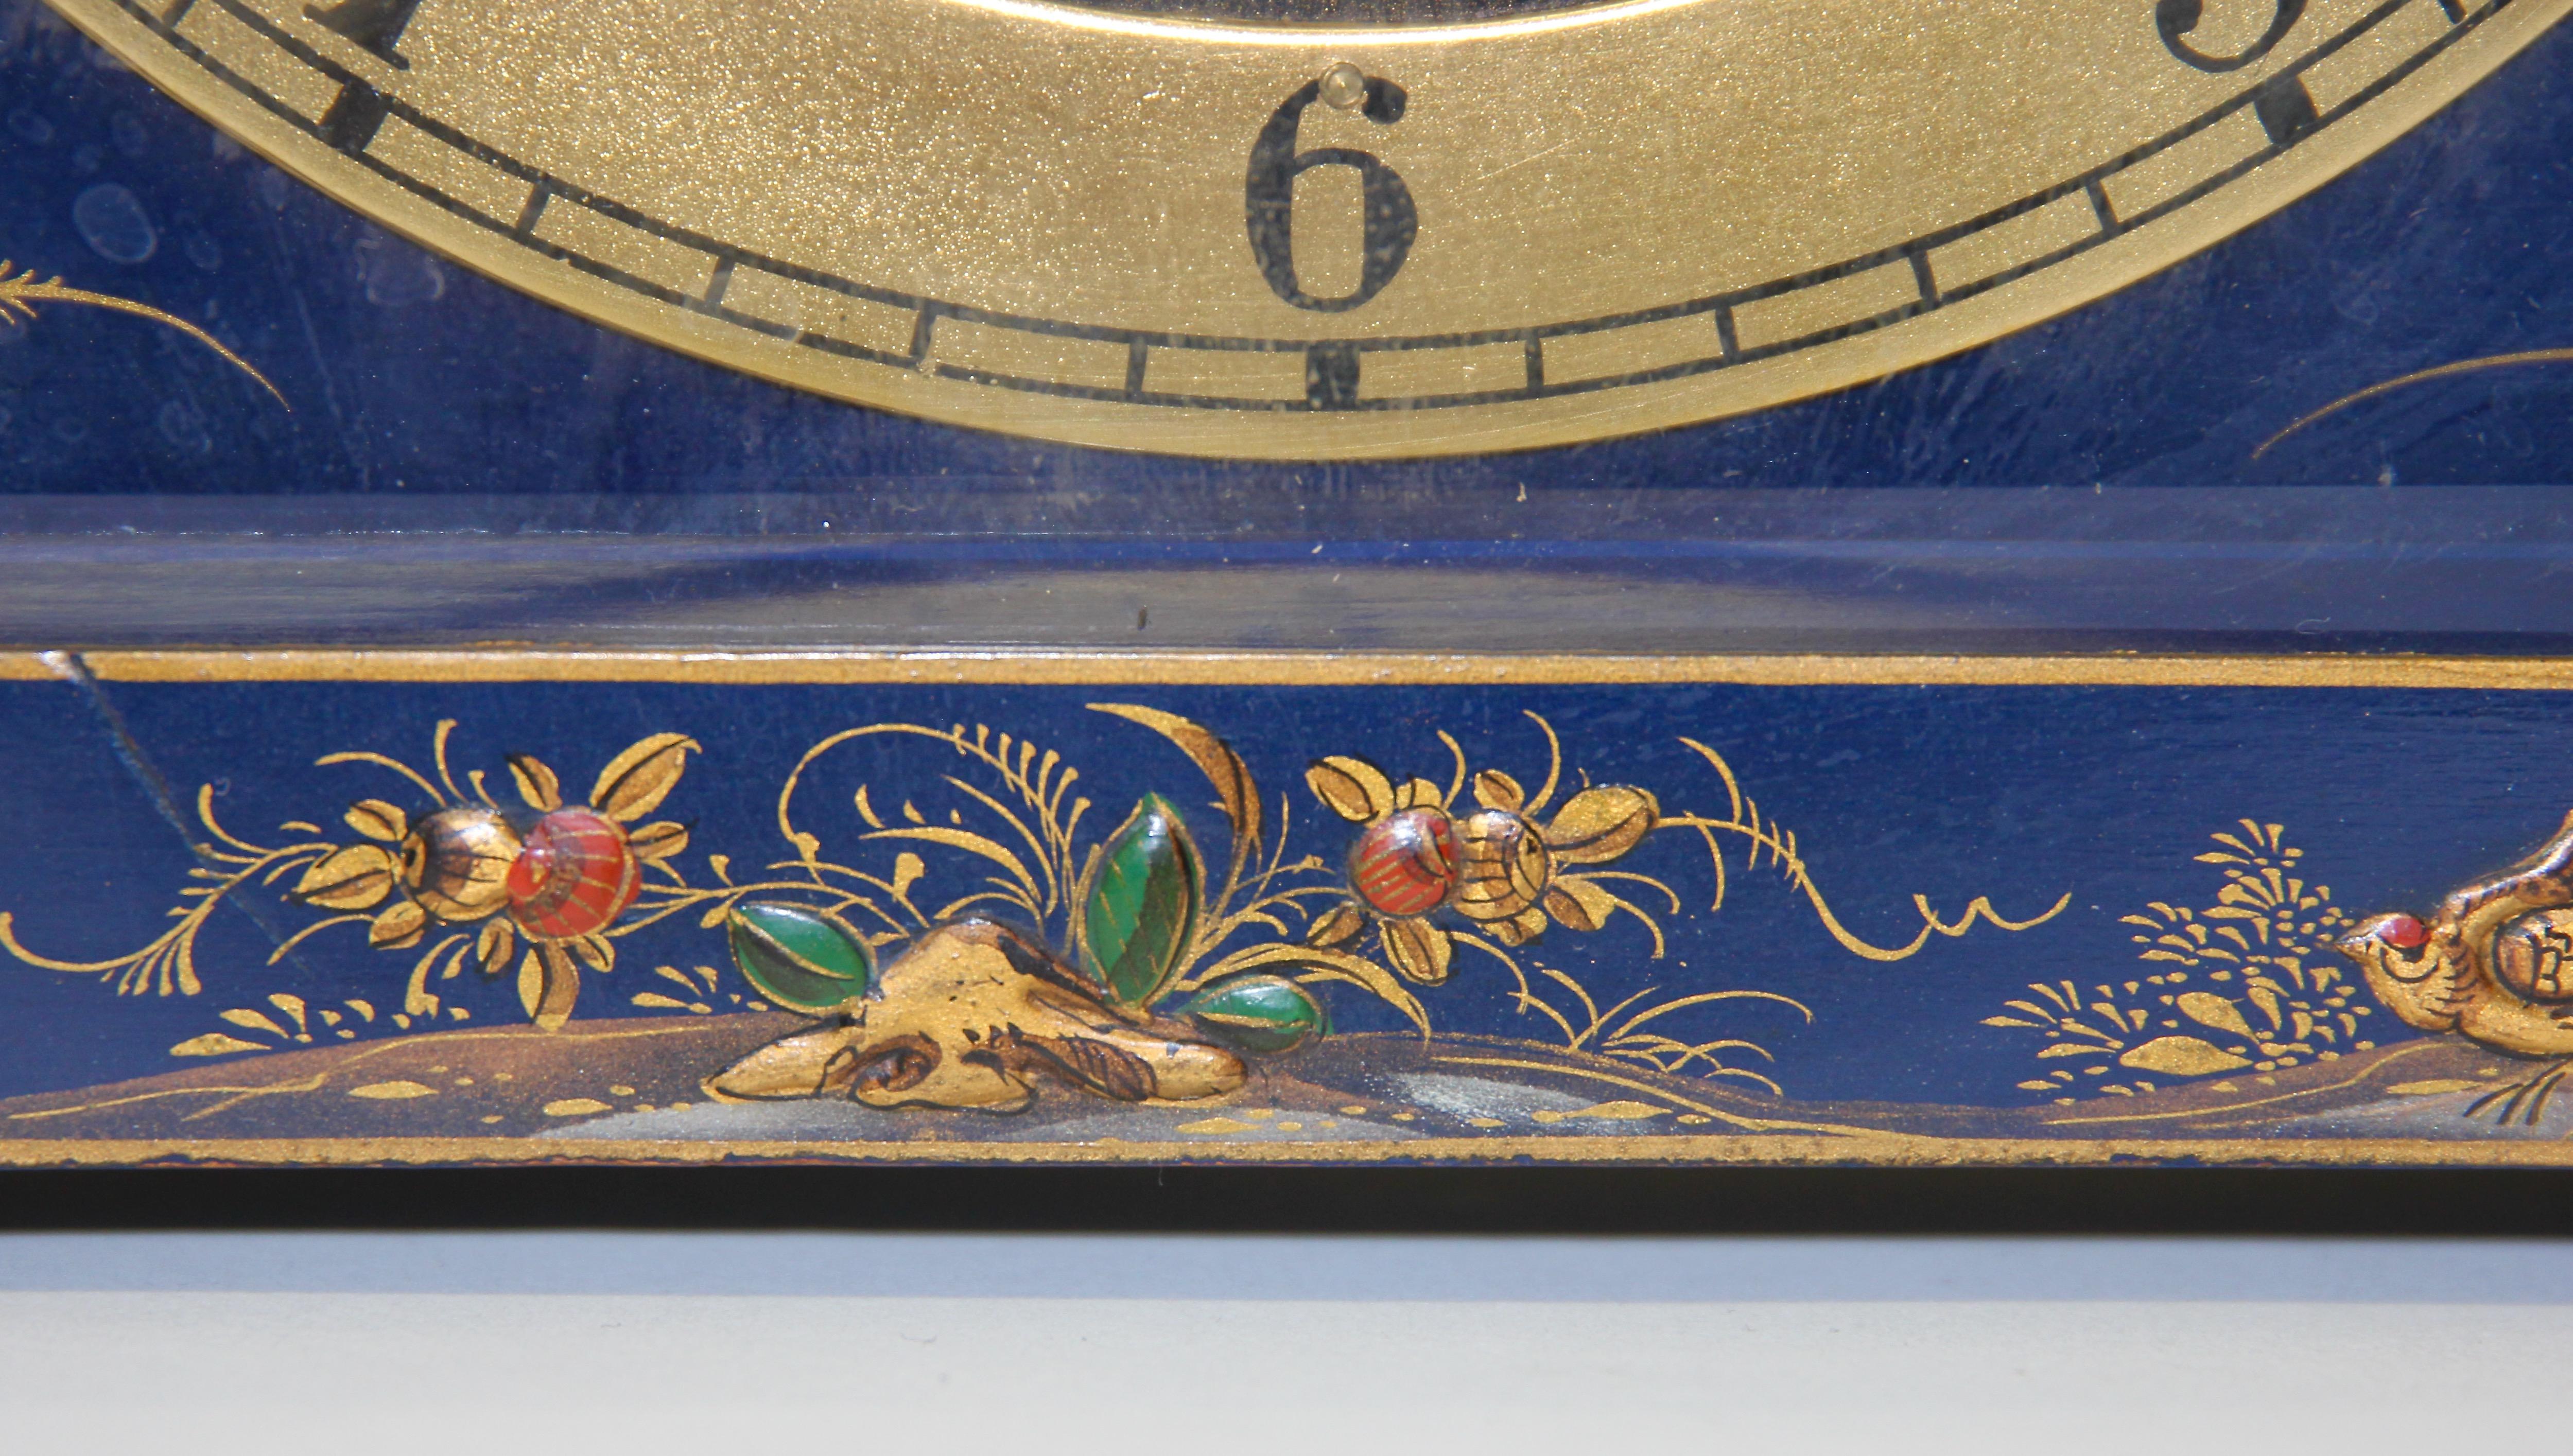 Antique Table Desk Clock, Painted, Chinoiserie, China Art For Sale 5